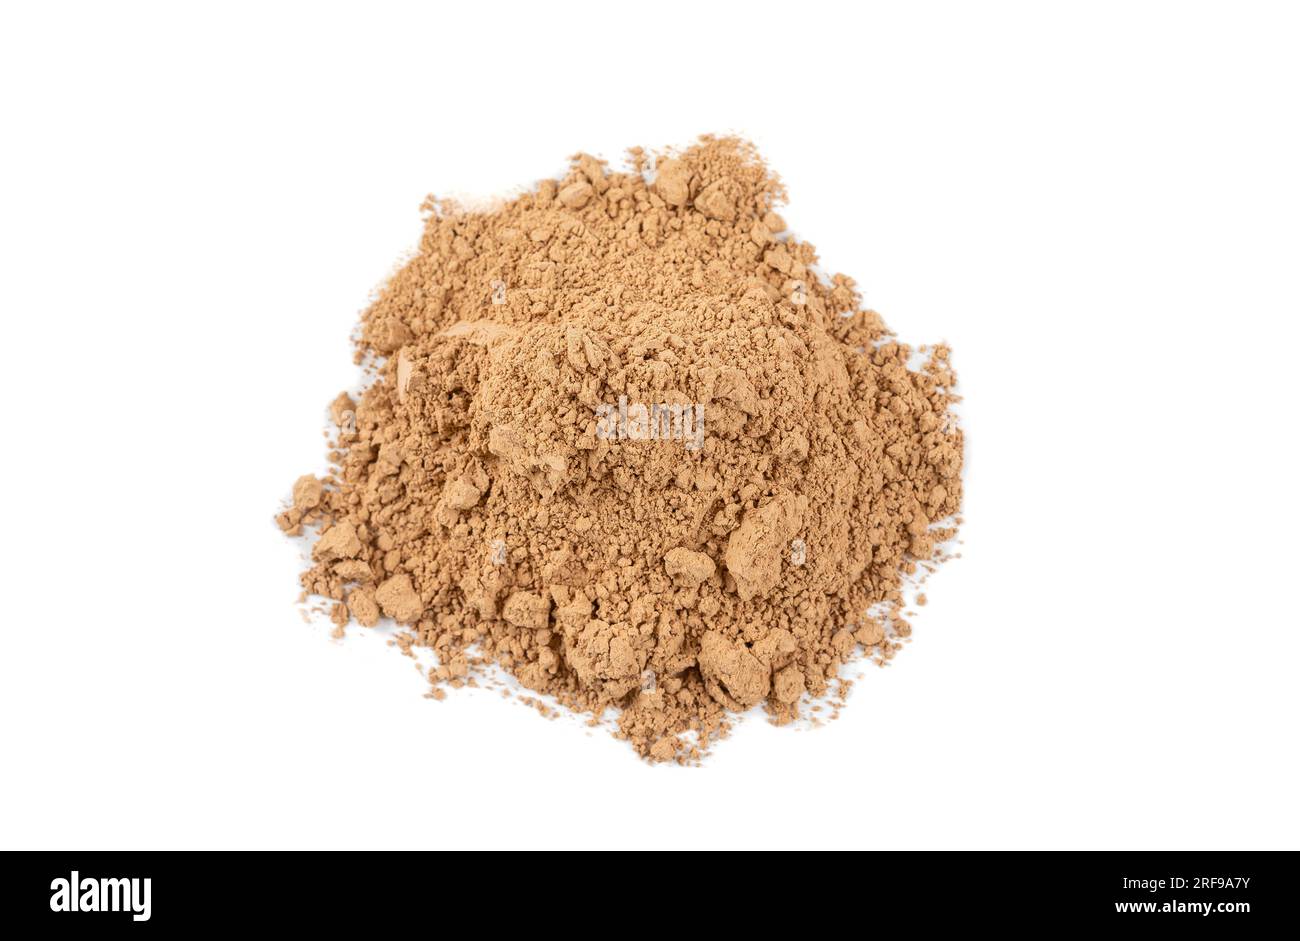 Pile of superfine yellow clay on white background. Stock Photo